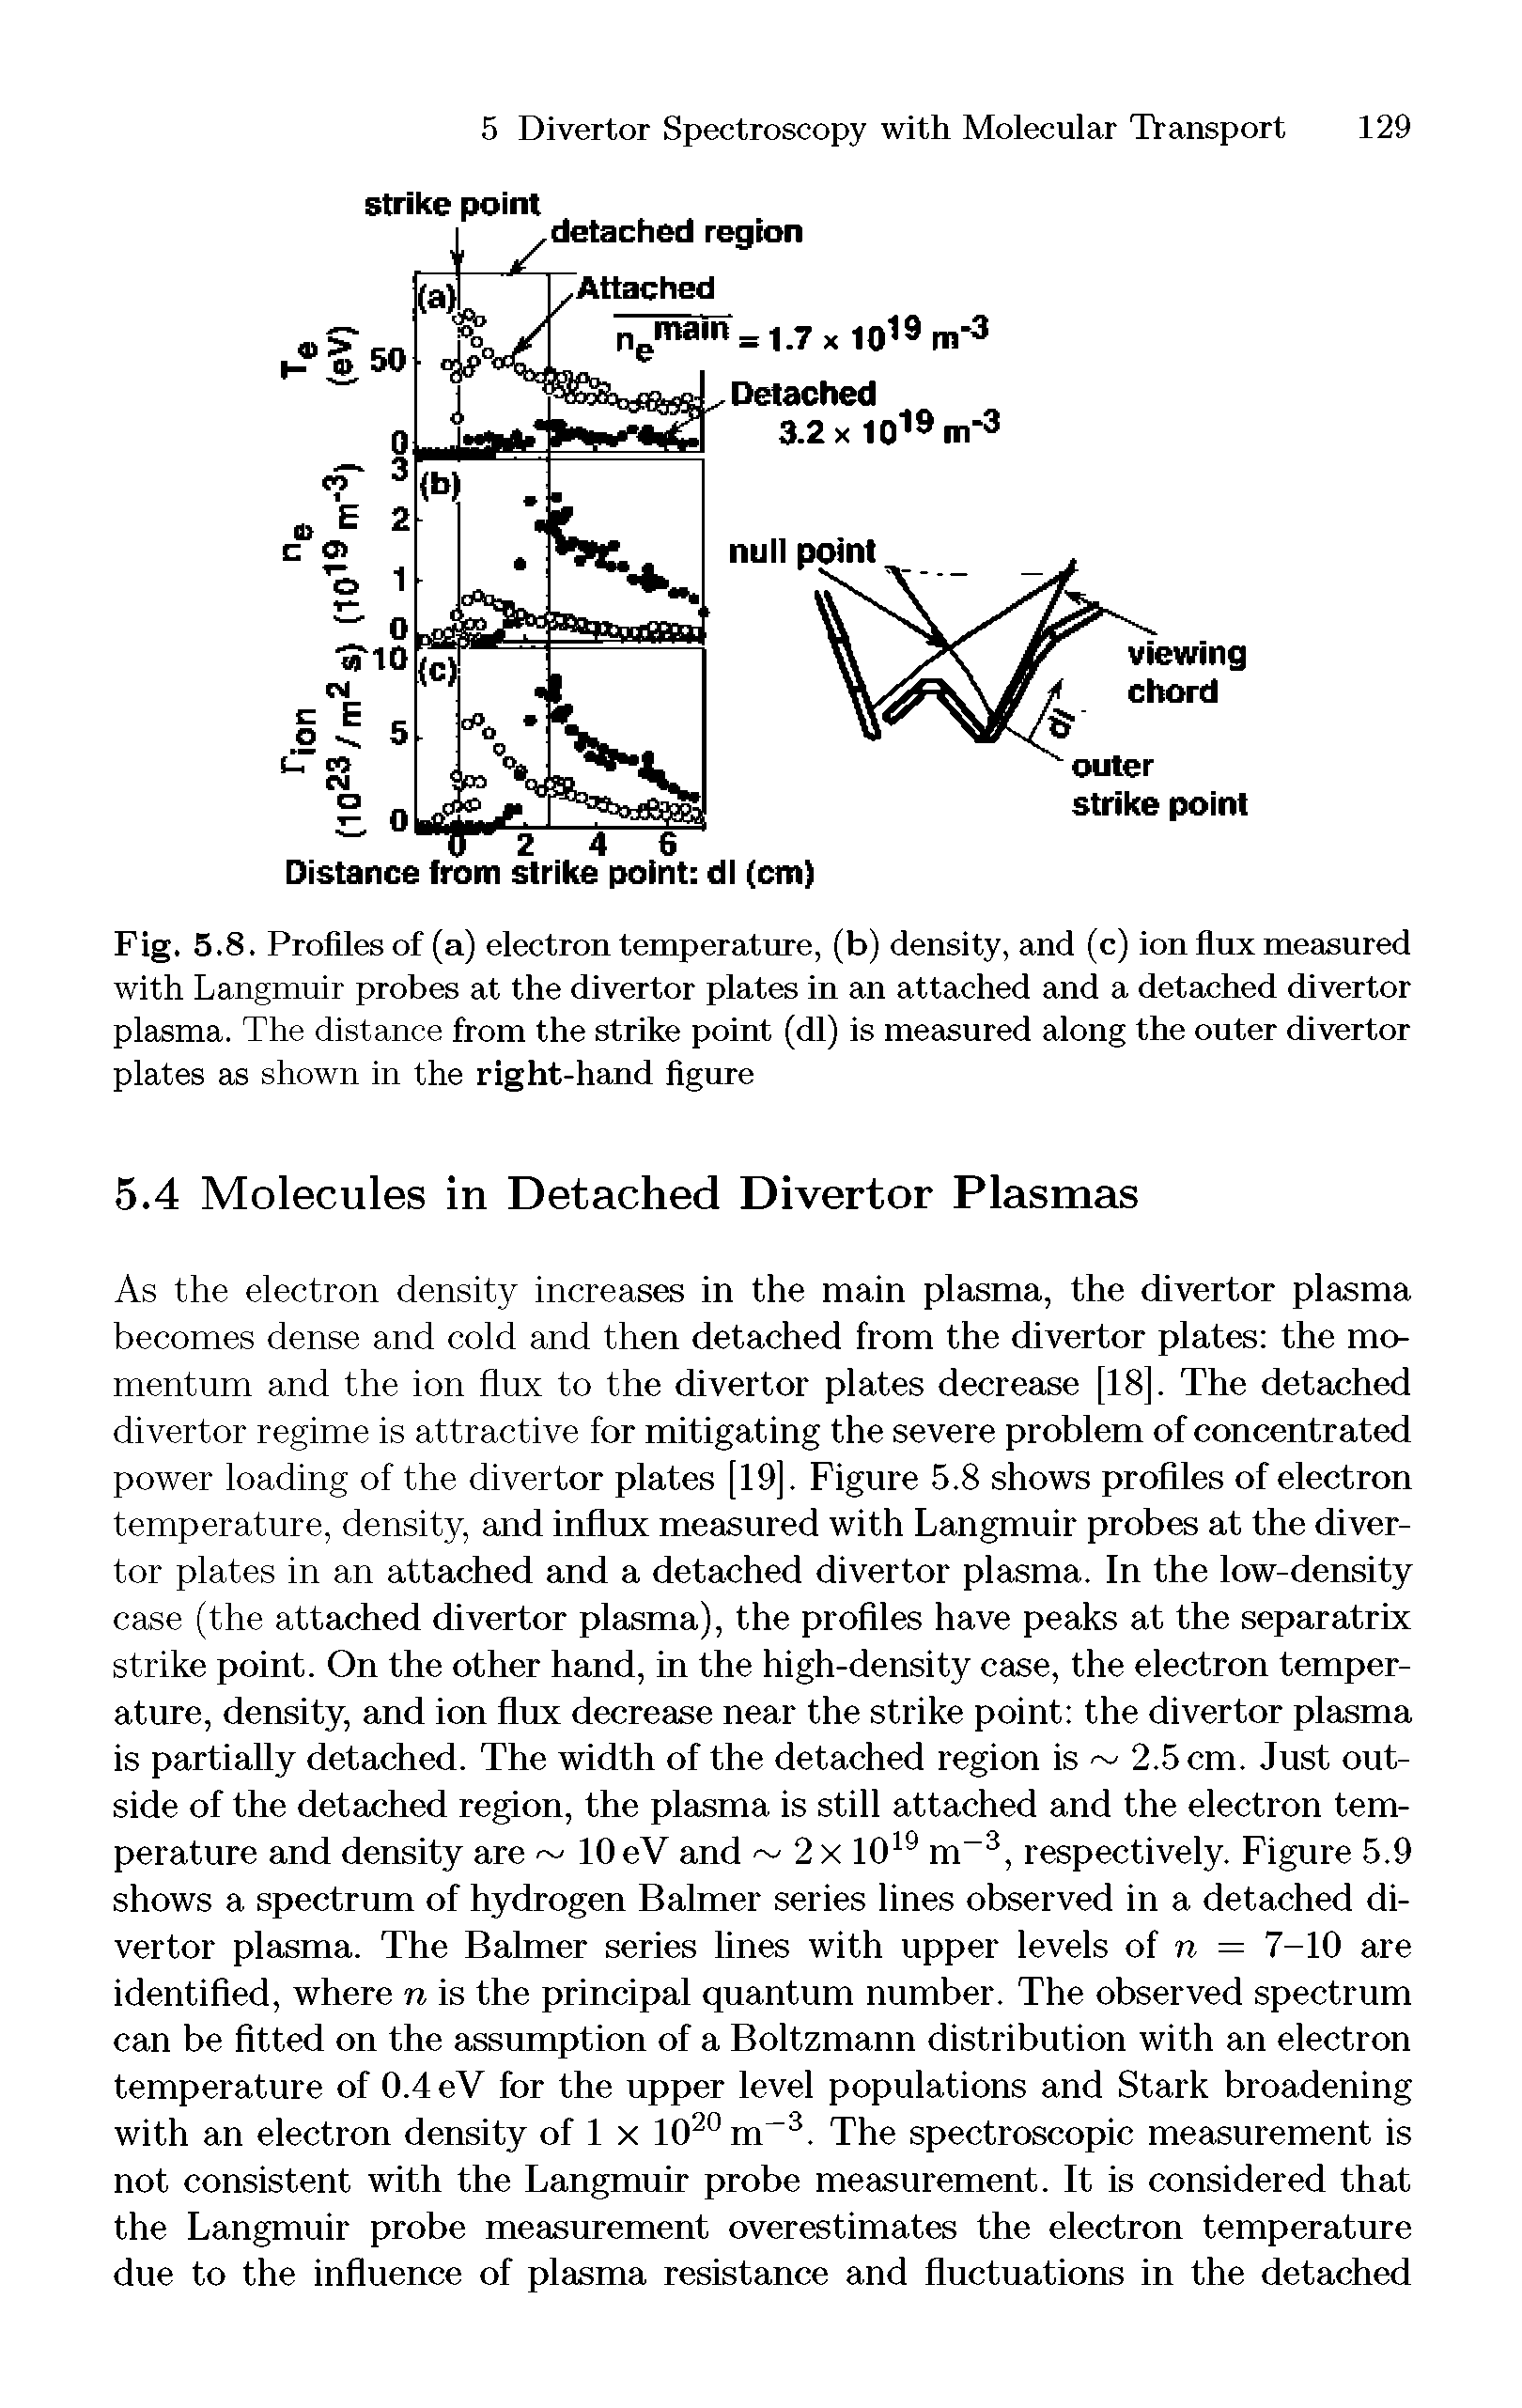 Fig. 5.8. Profiles of (a) electron temperature, (b) density, and (c) ion flux measured with Langmuir probes at the divertor plates in an attached and a detached divertor plasma. The distance from the strike point (dl) is measured along the outer divertor plates as shown in the right-hand figure...